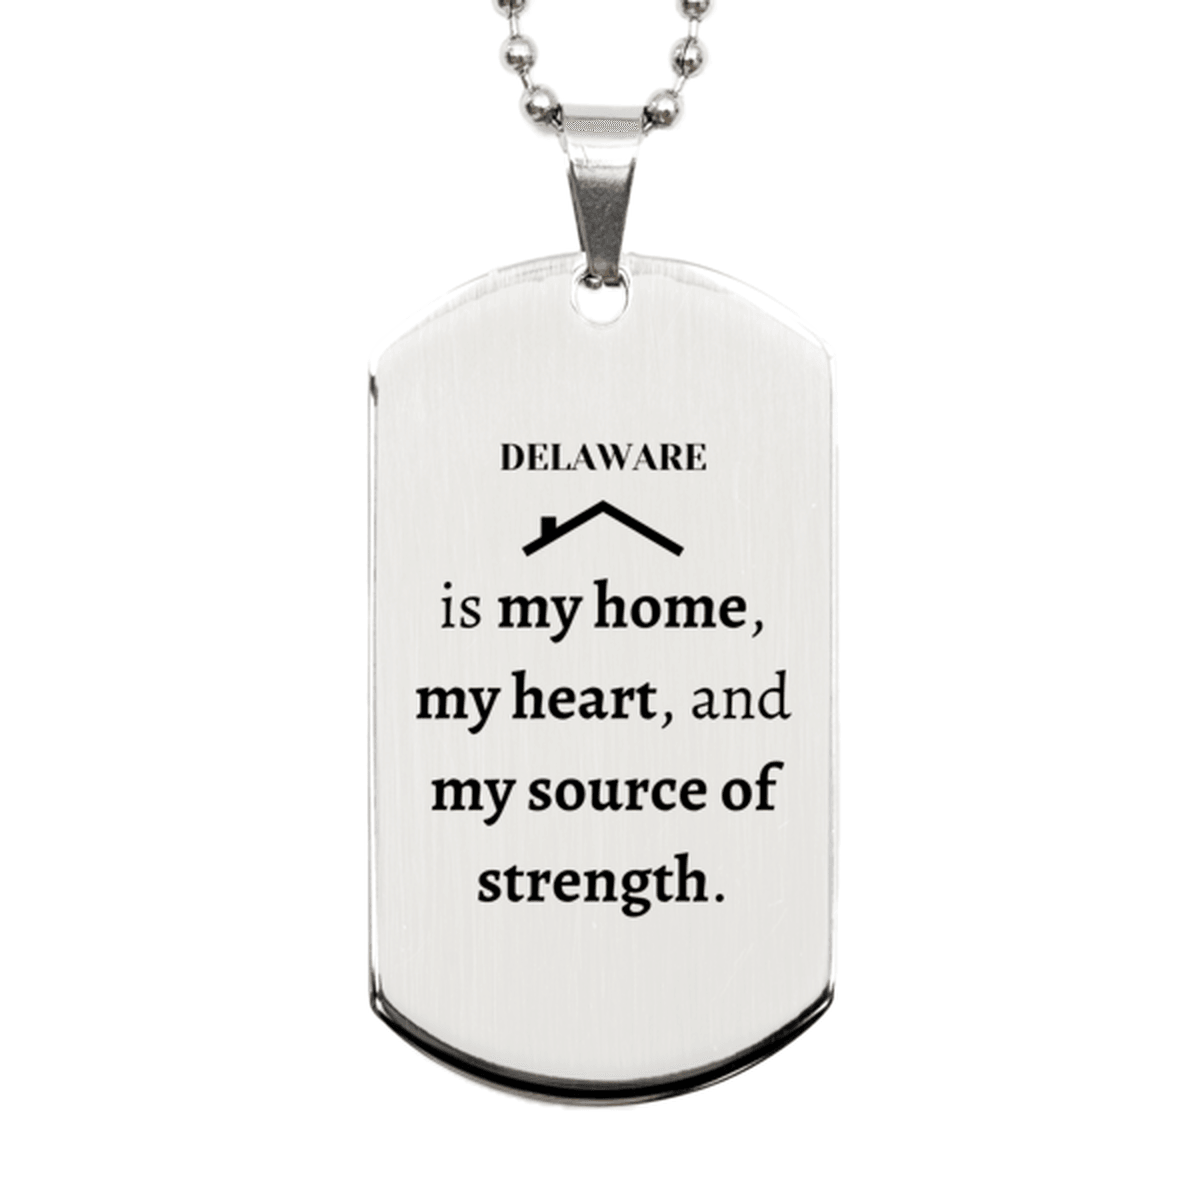 Delaware is my home Gifts, Lovely Delaware Birthday Christmas Silver Dog Tag For People from Delaware, Men, Women, Friends - Mallard Moon Gift Shop